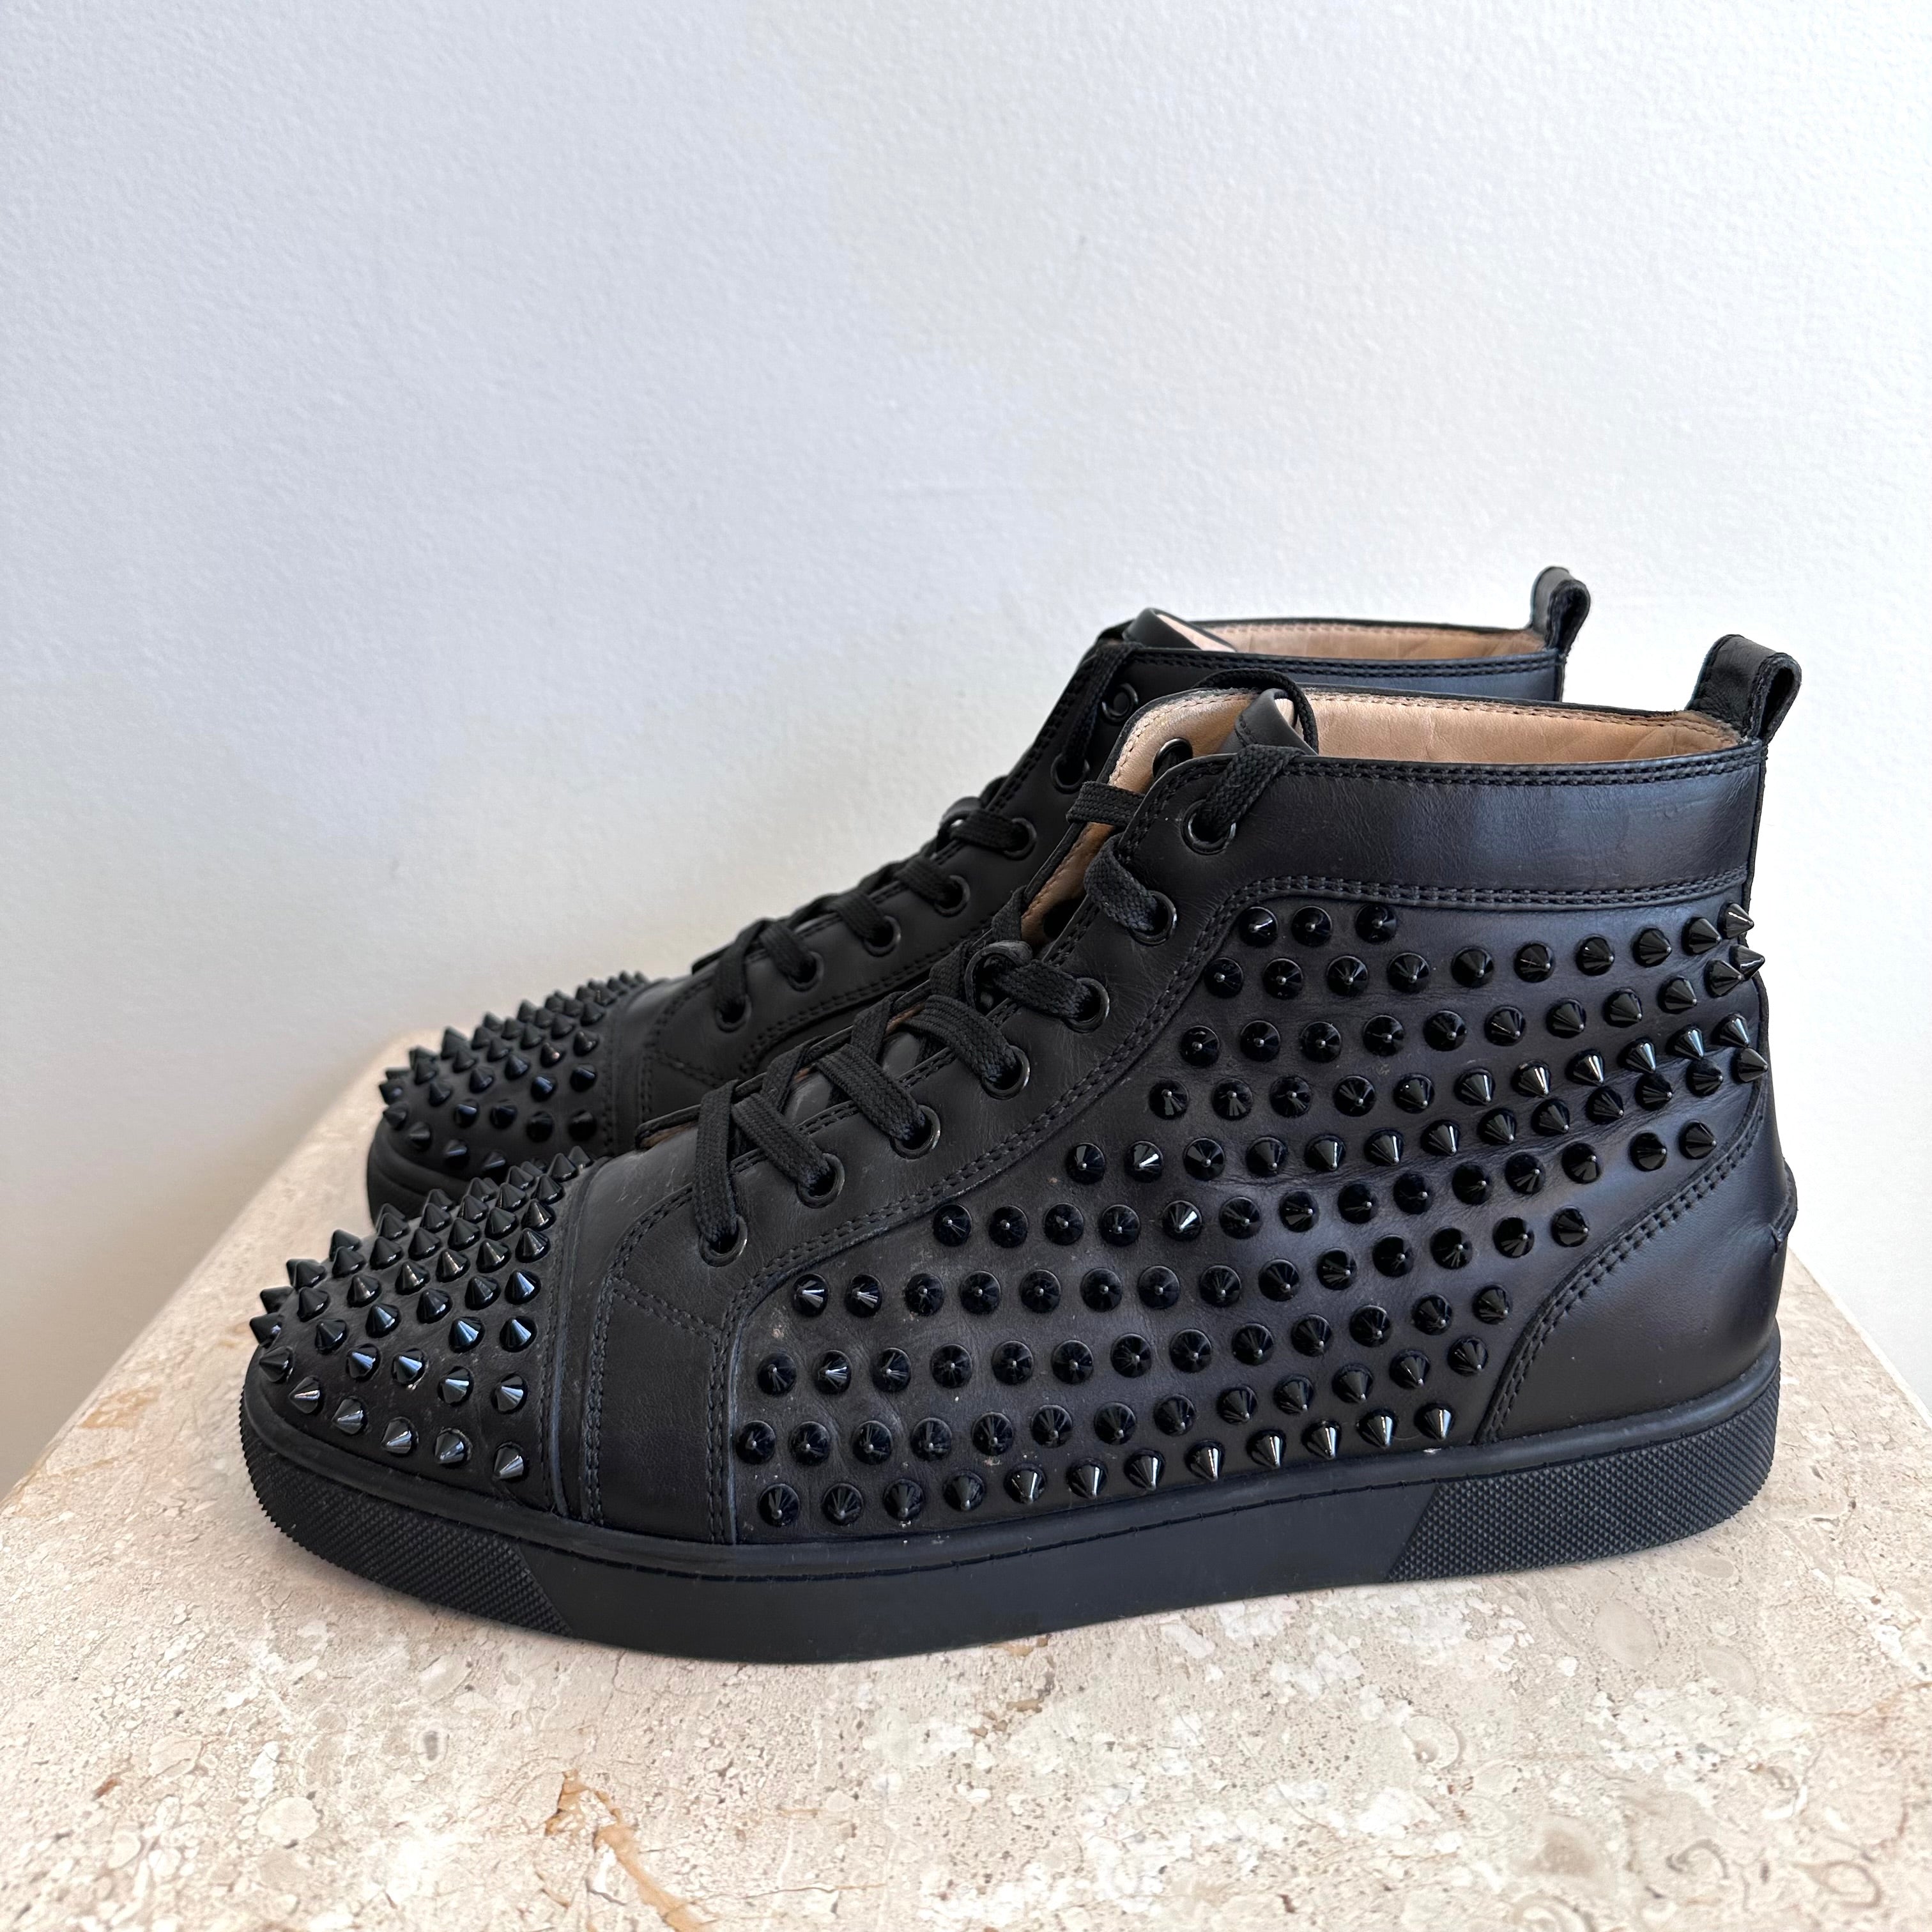 Pre-Owned CHRISTIAN LOUBOUTIN Black Leather Louis Spikes High Top Sneakers Size 41.5